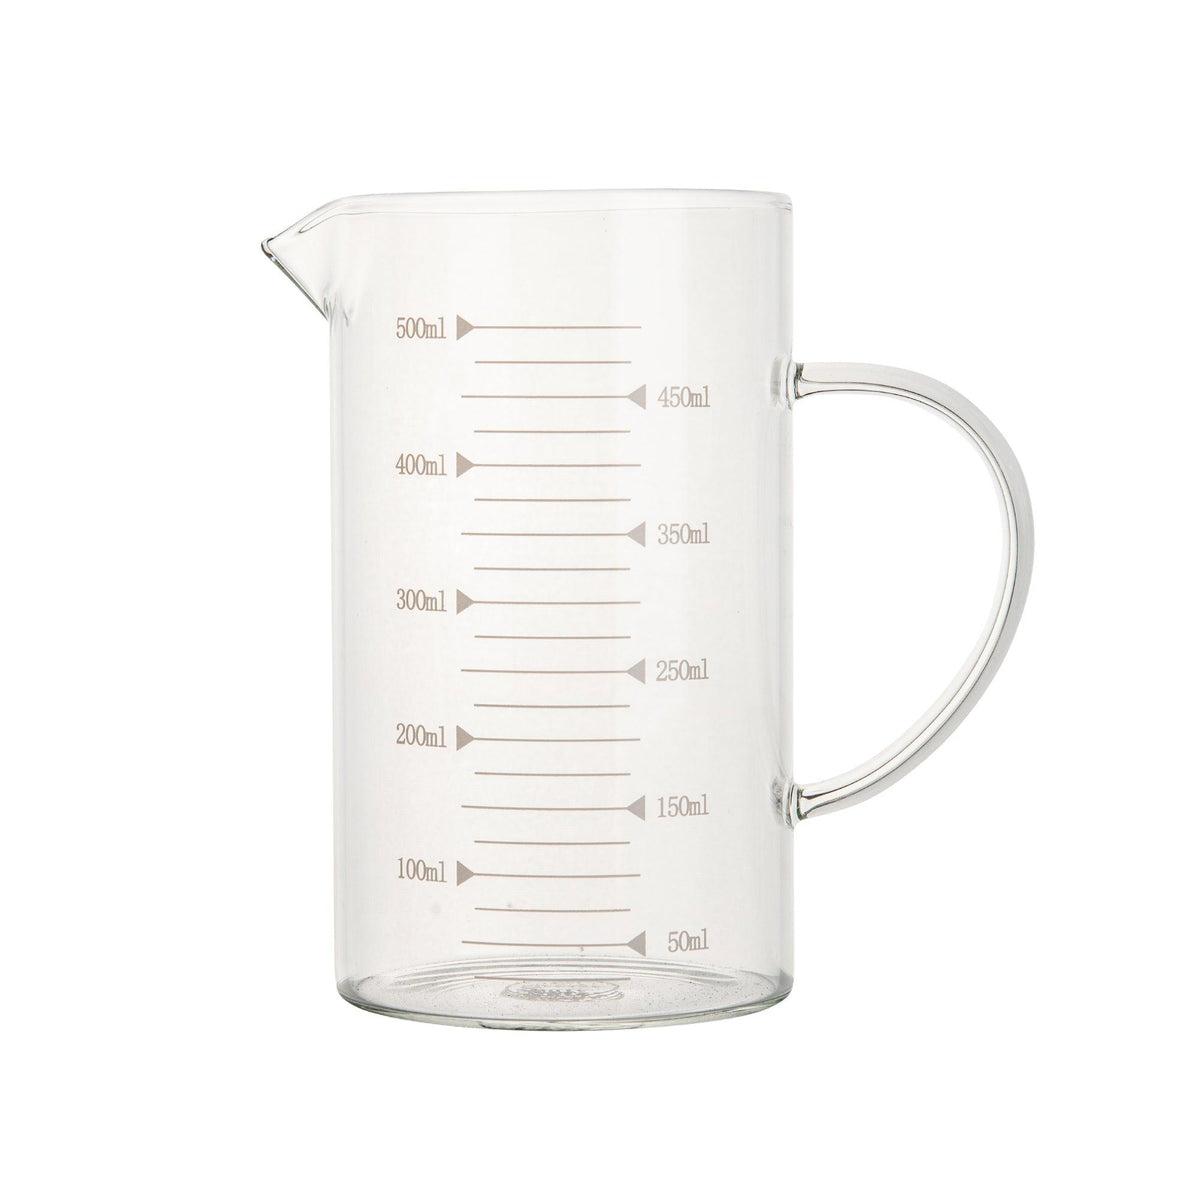 OnePine 500ml Glass Measuring Cup with Lid, Measuring Jug for Kitchen